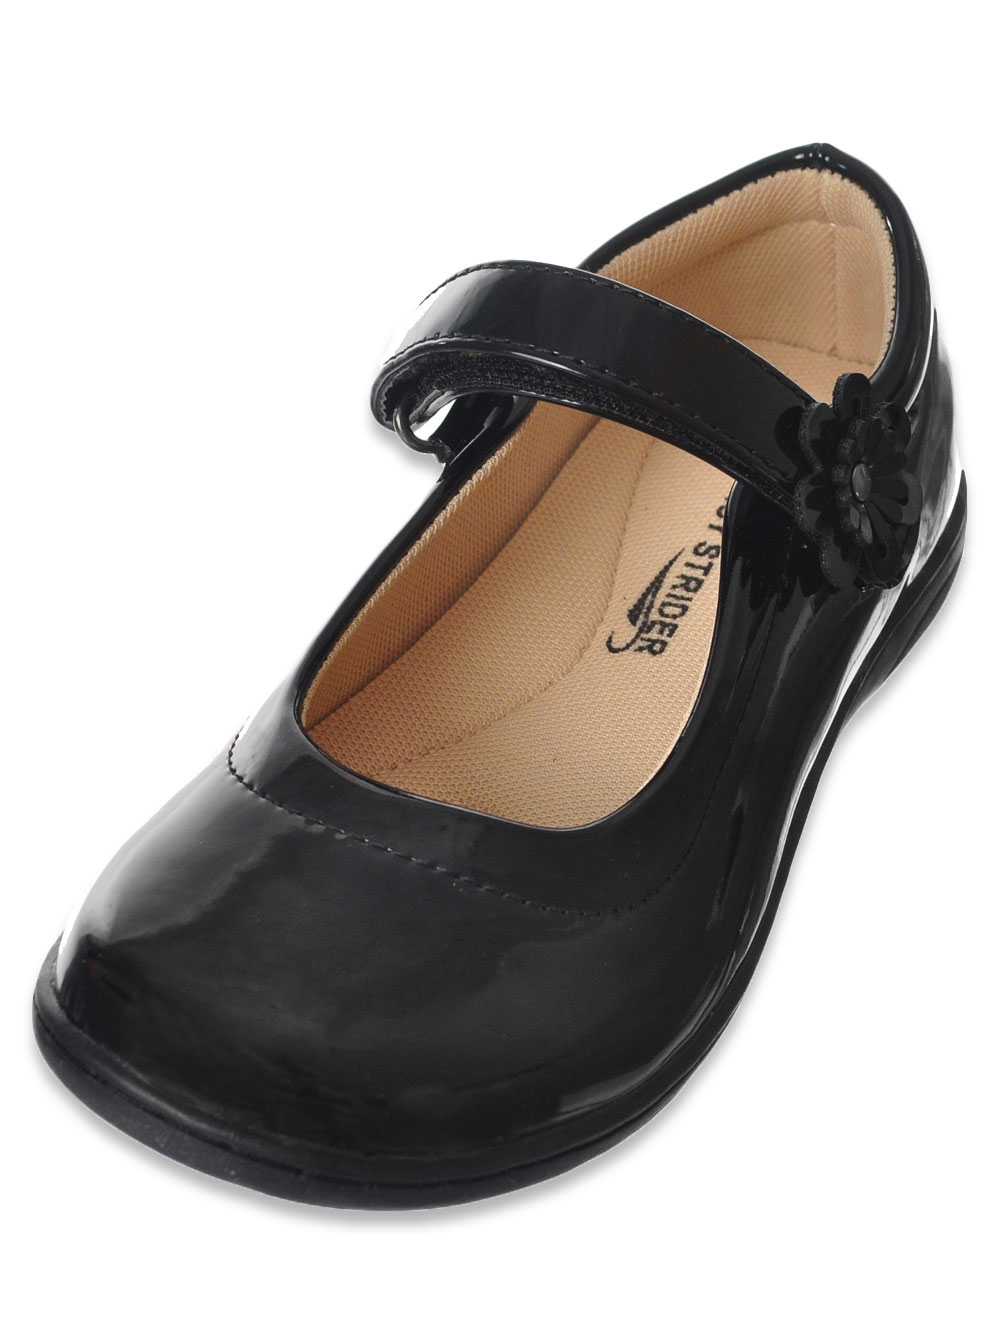 baby girl black mary jane shoes